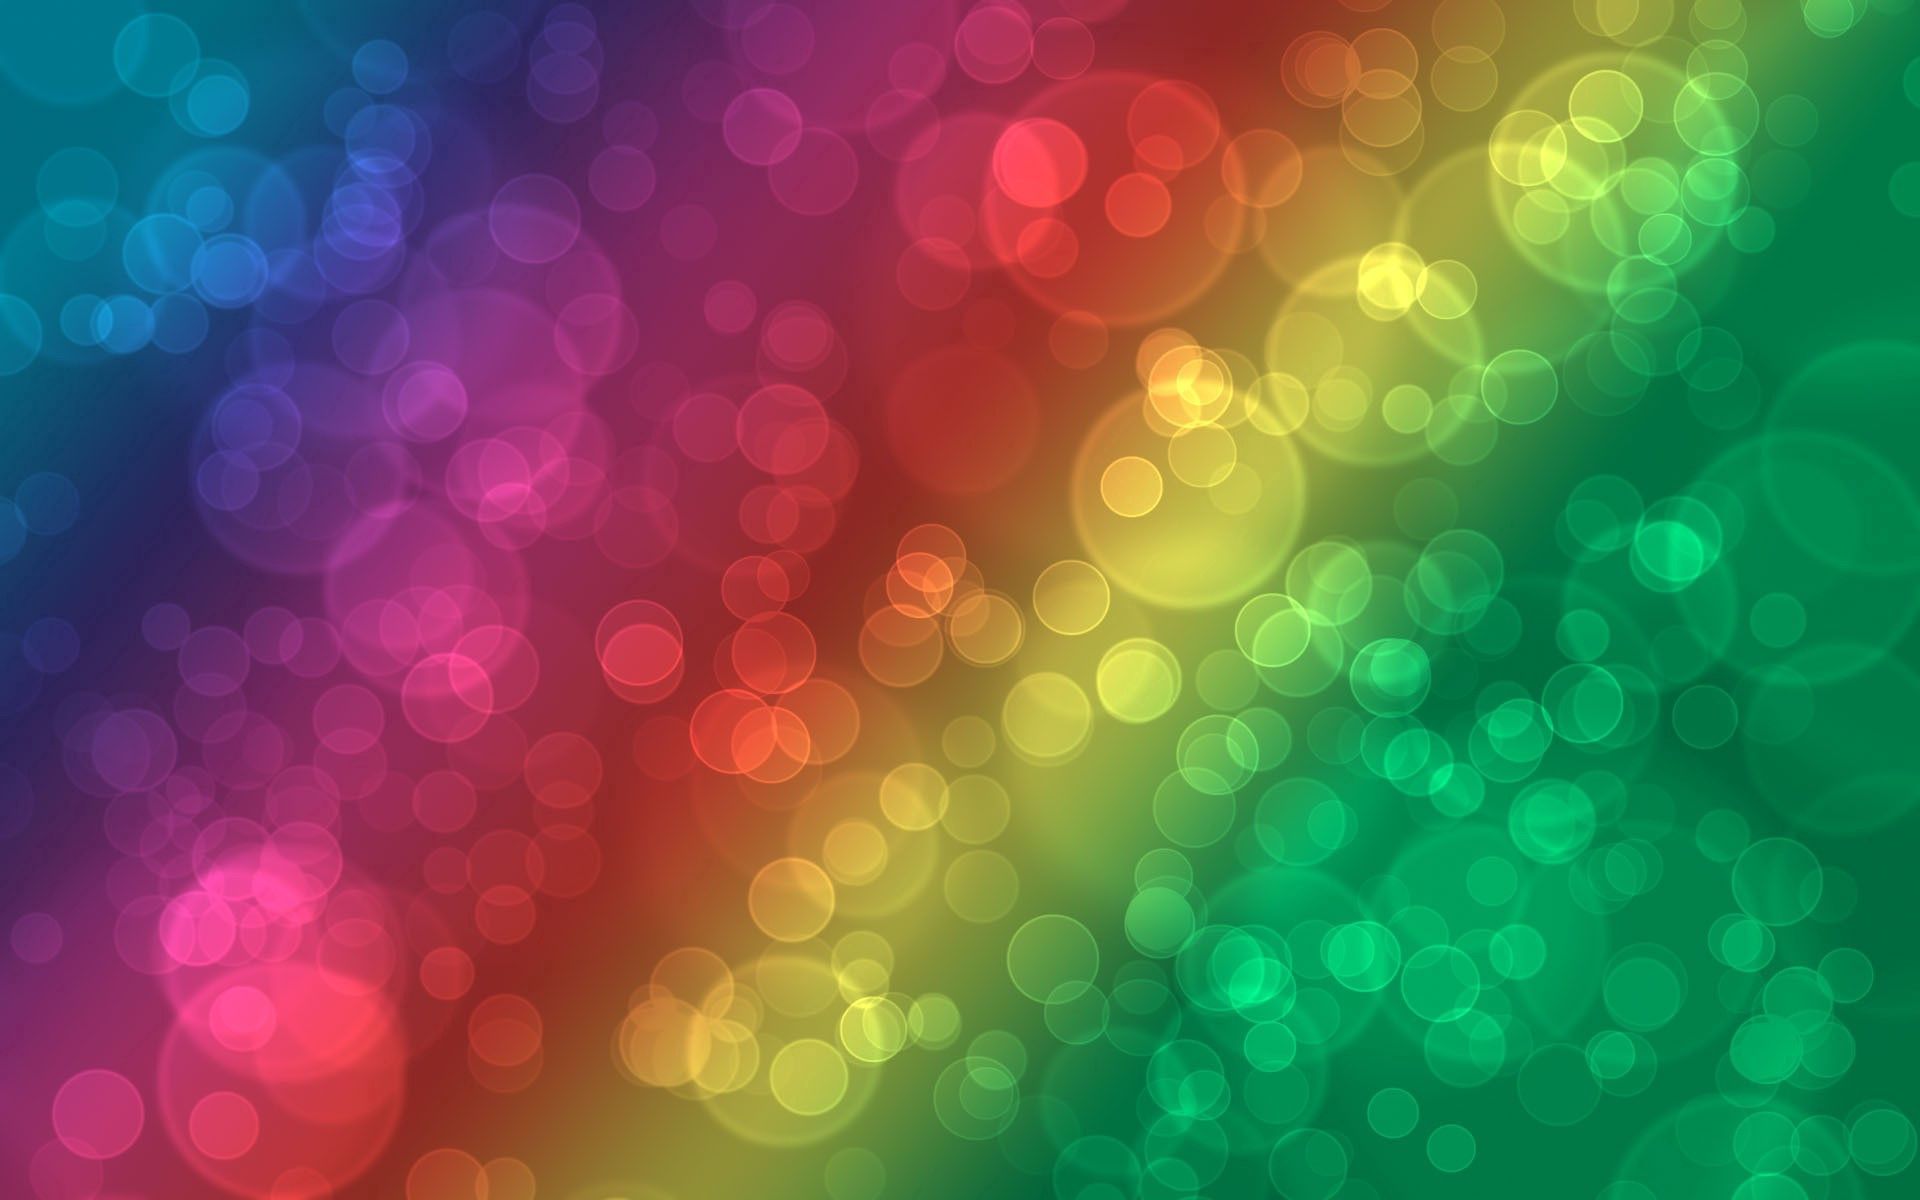 abstract, background, glare, circles, multicolored, motley Image for desktop